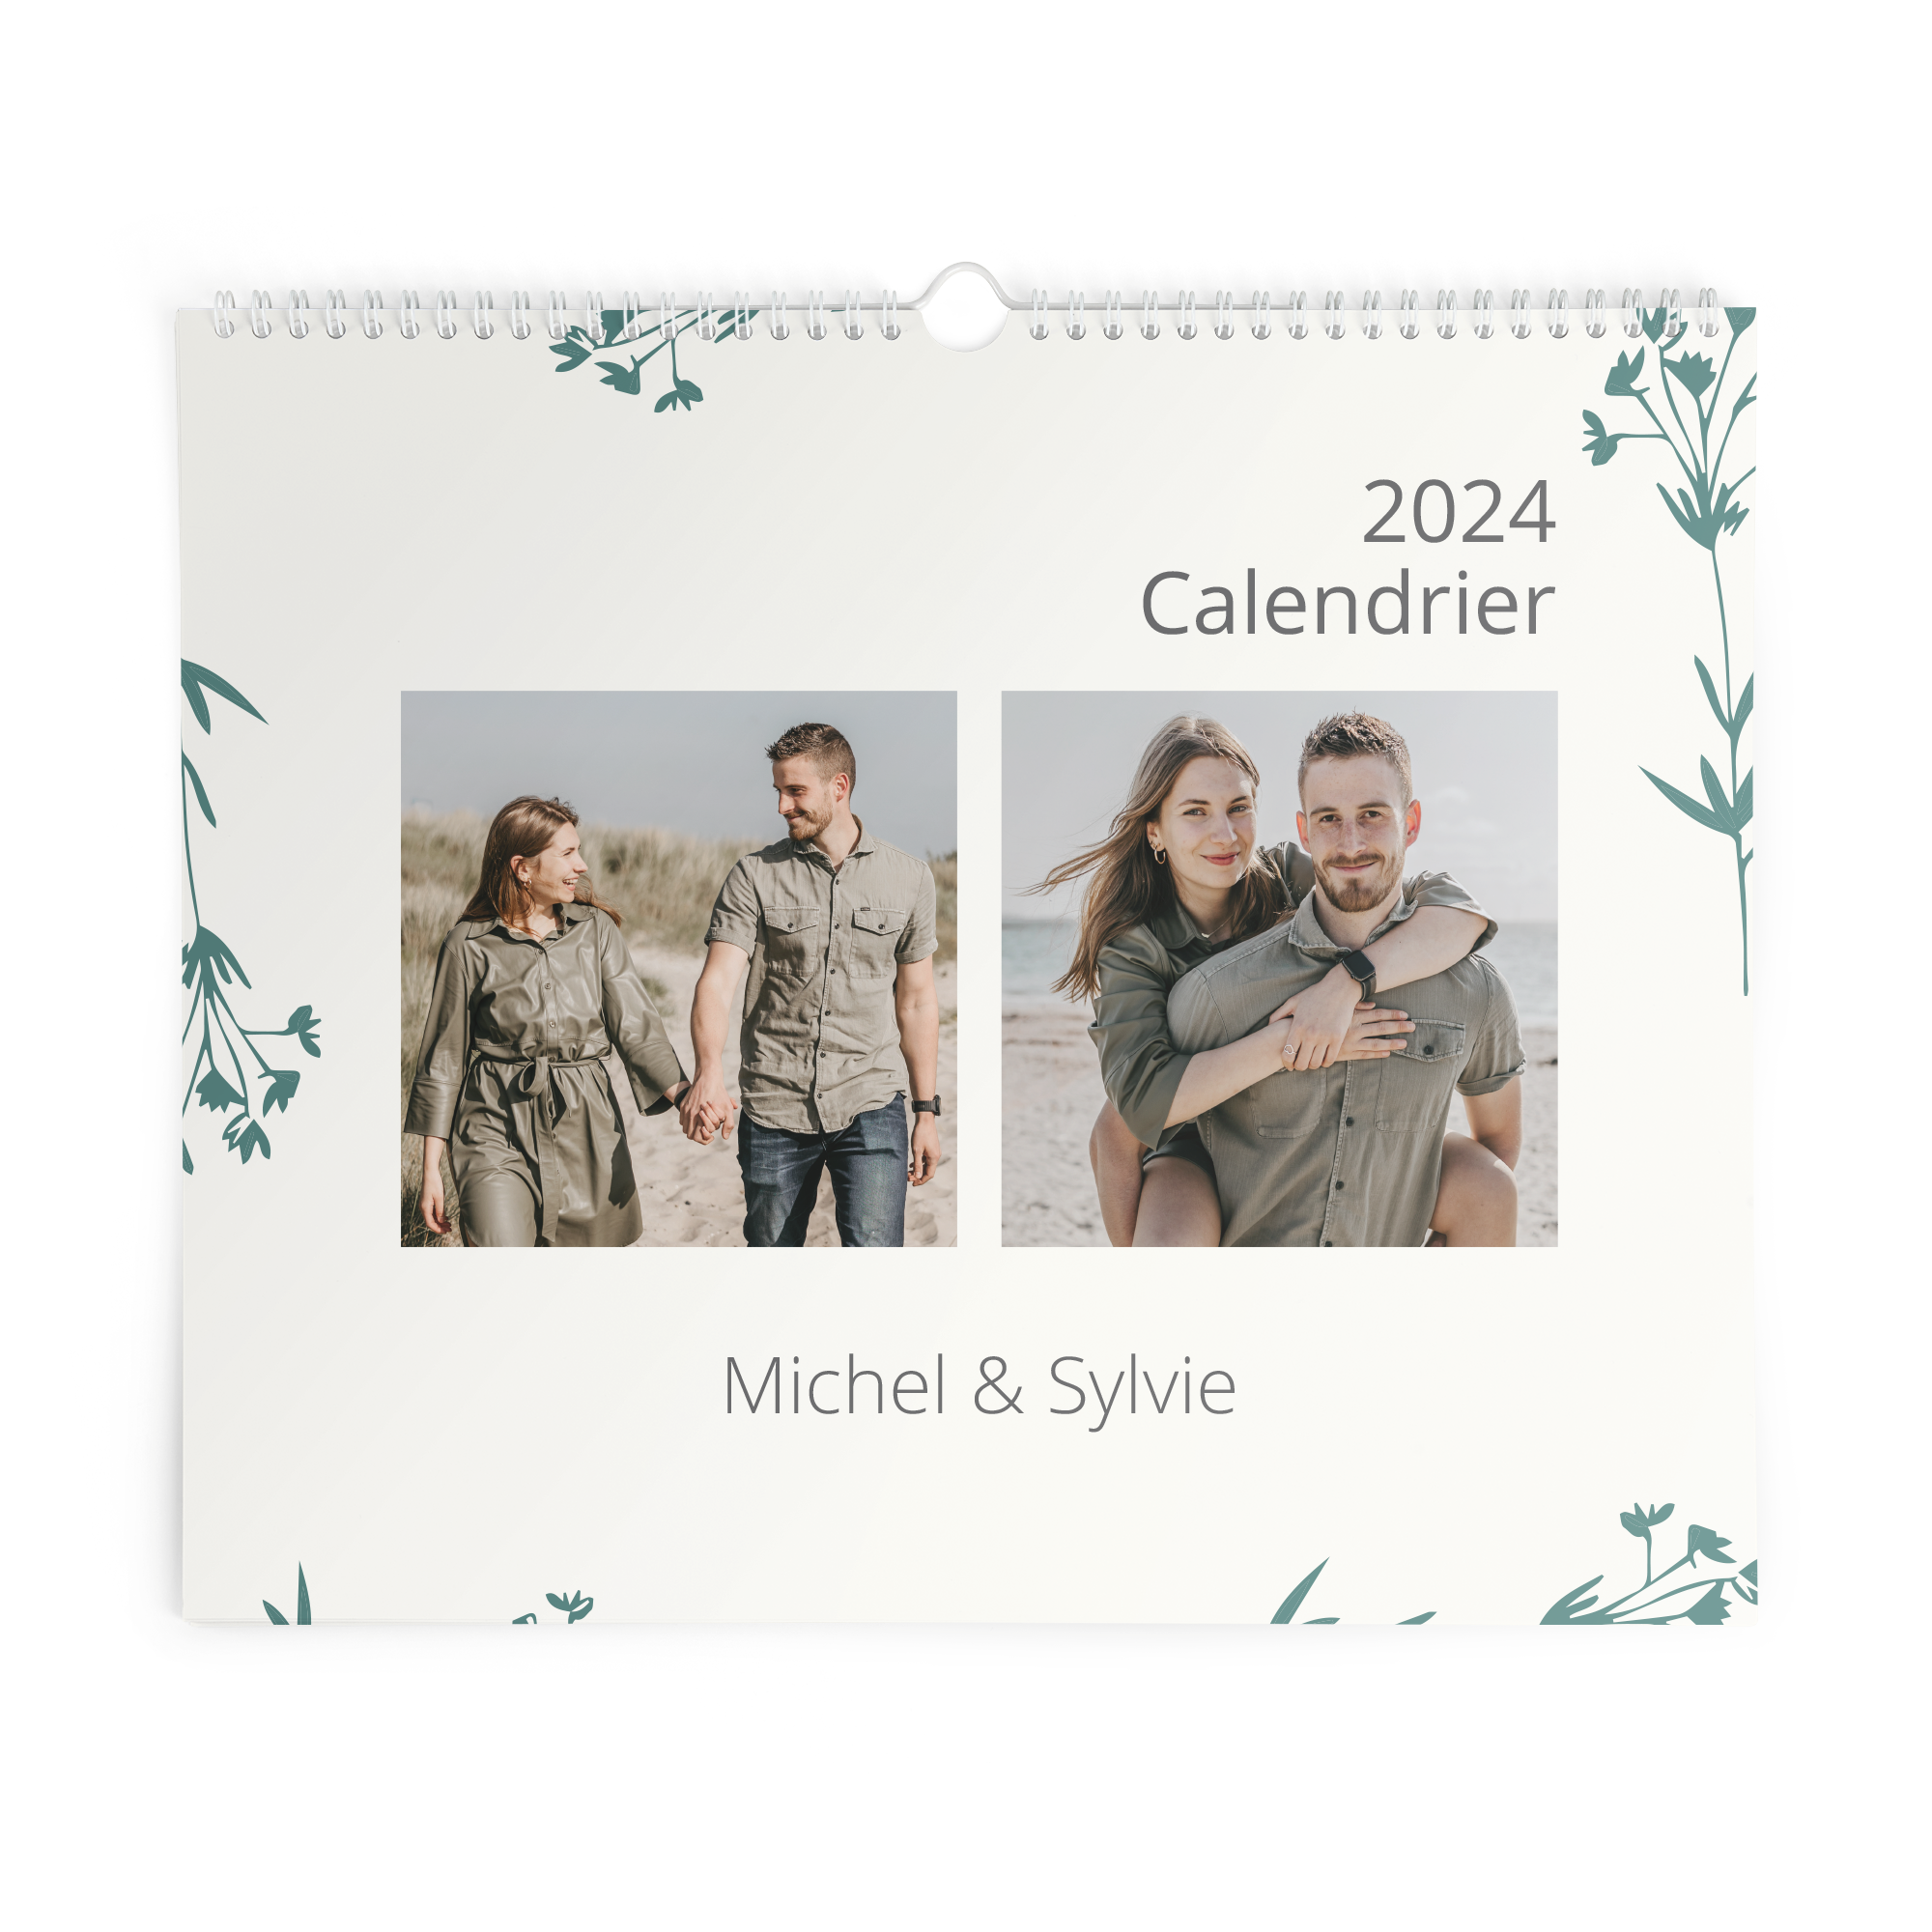 Calendrier 2024 - Paysage 